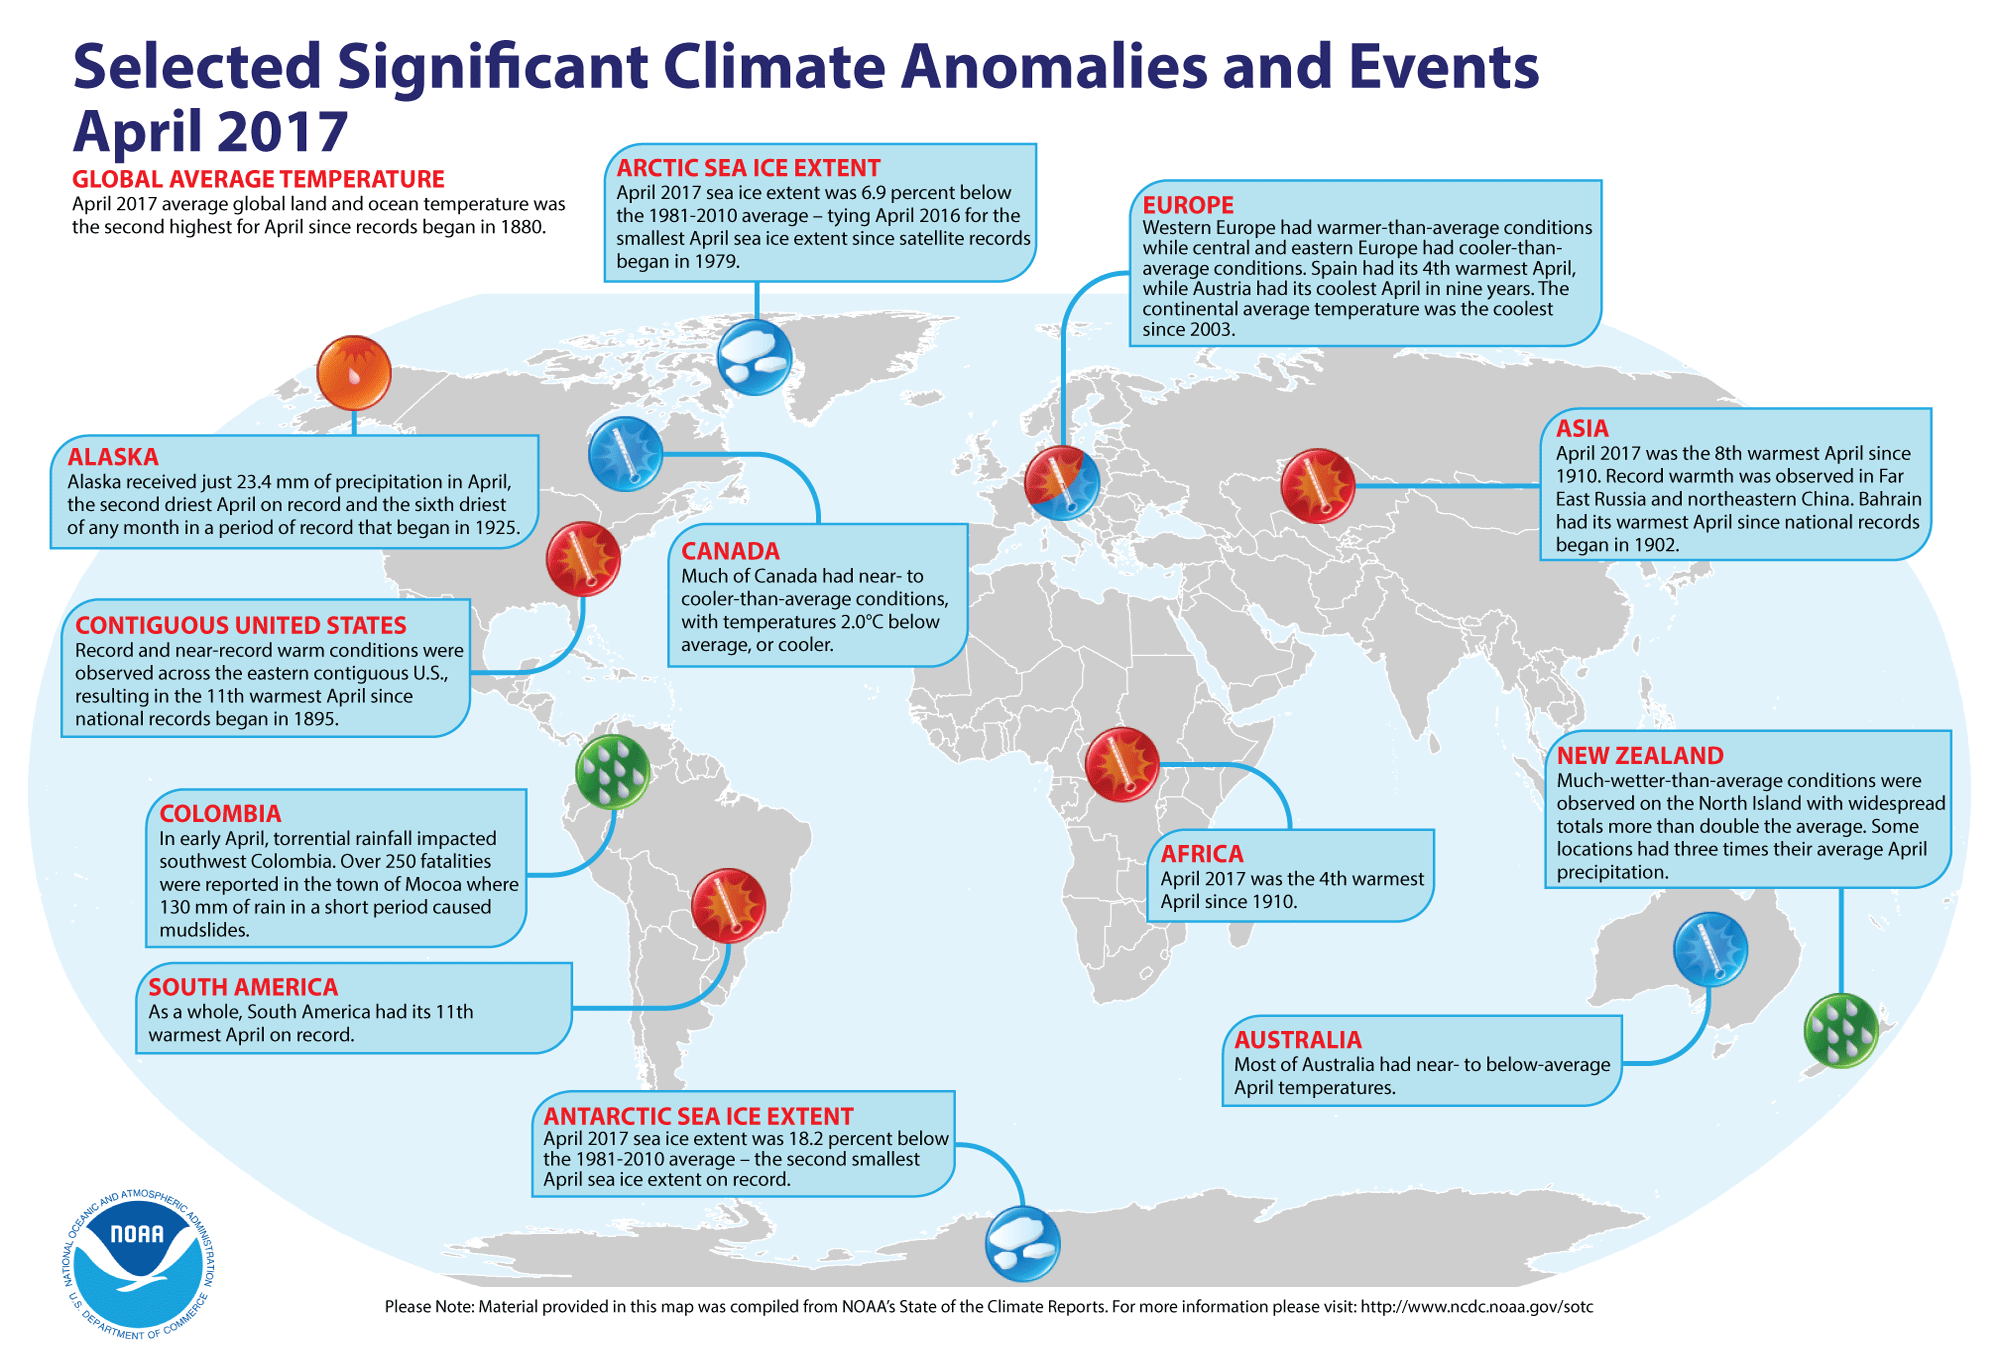 Significant Climate Anomalies and Events map.